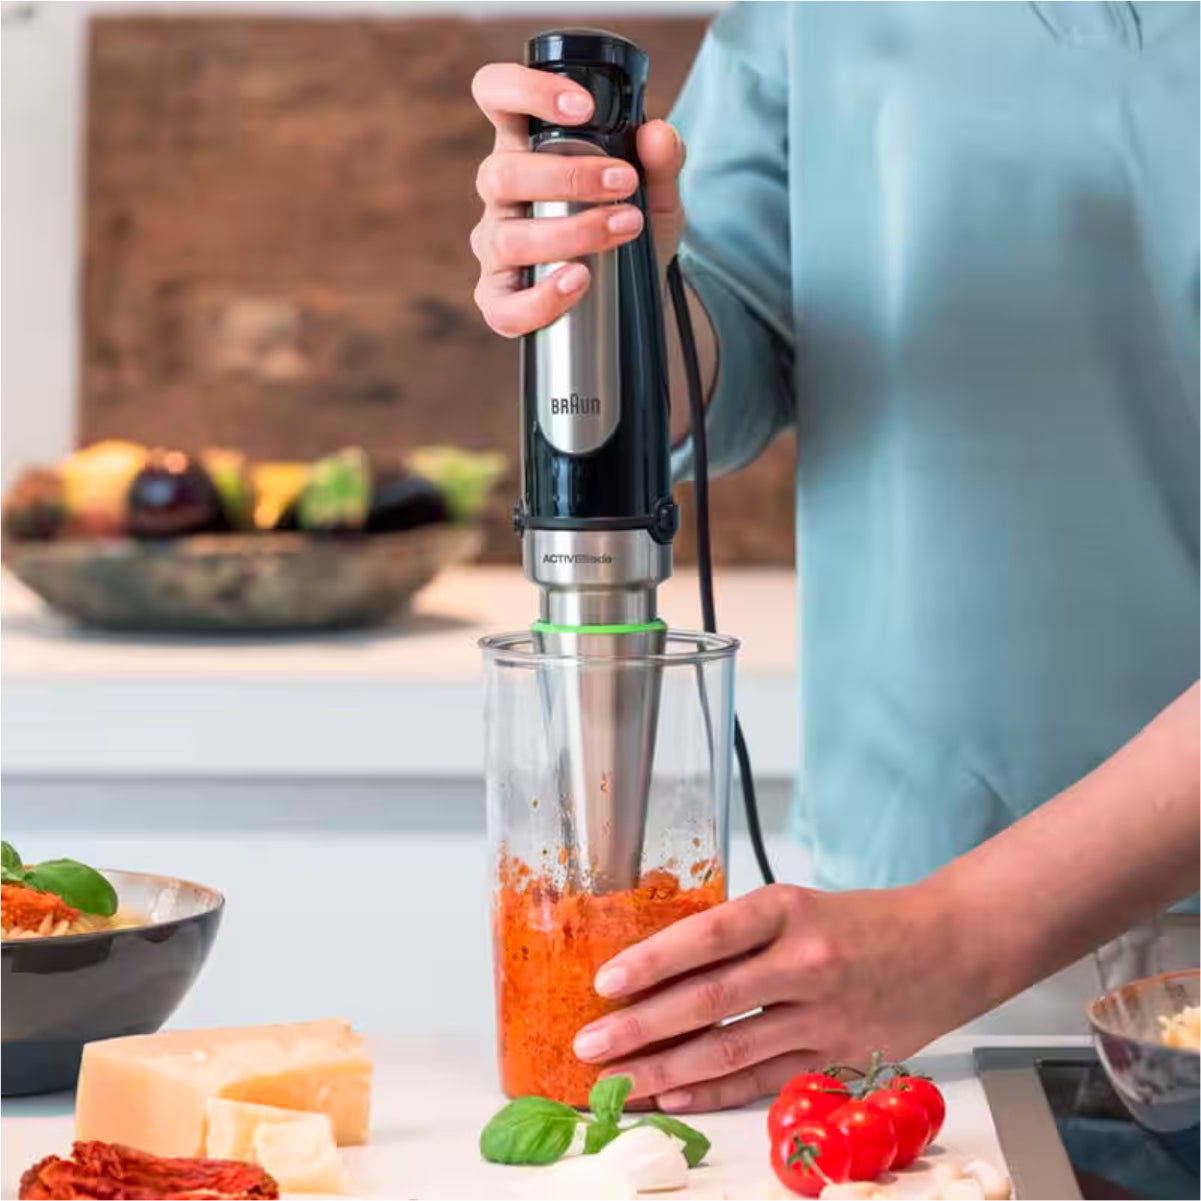 Braun MQ7 MultiQuick Hand Blender Review: Slays Every Sauce and